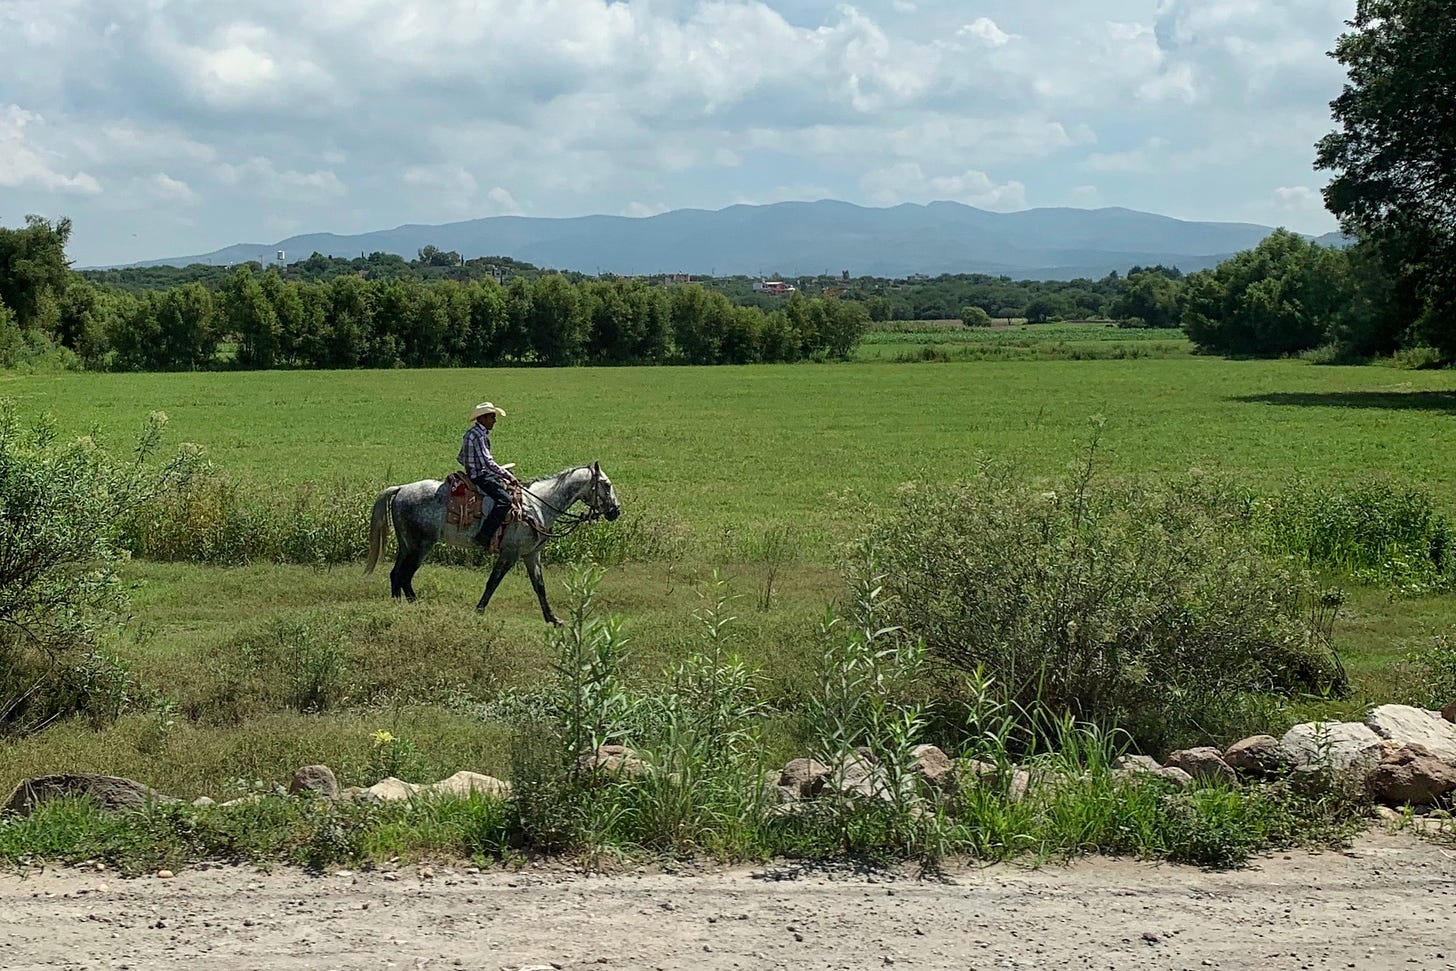 A lone rider on horseback crossing an open field with the dirt road in the forefront and mountains in the background against a blue sky with puffy white clouds